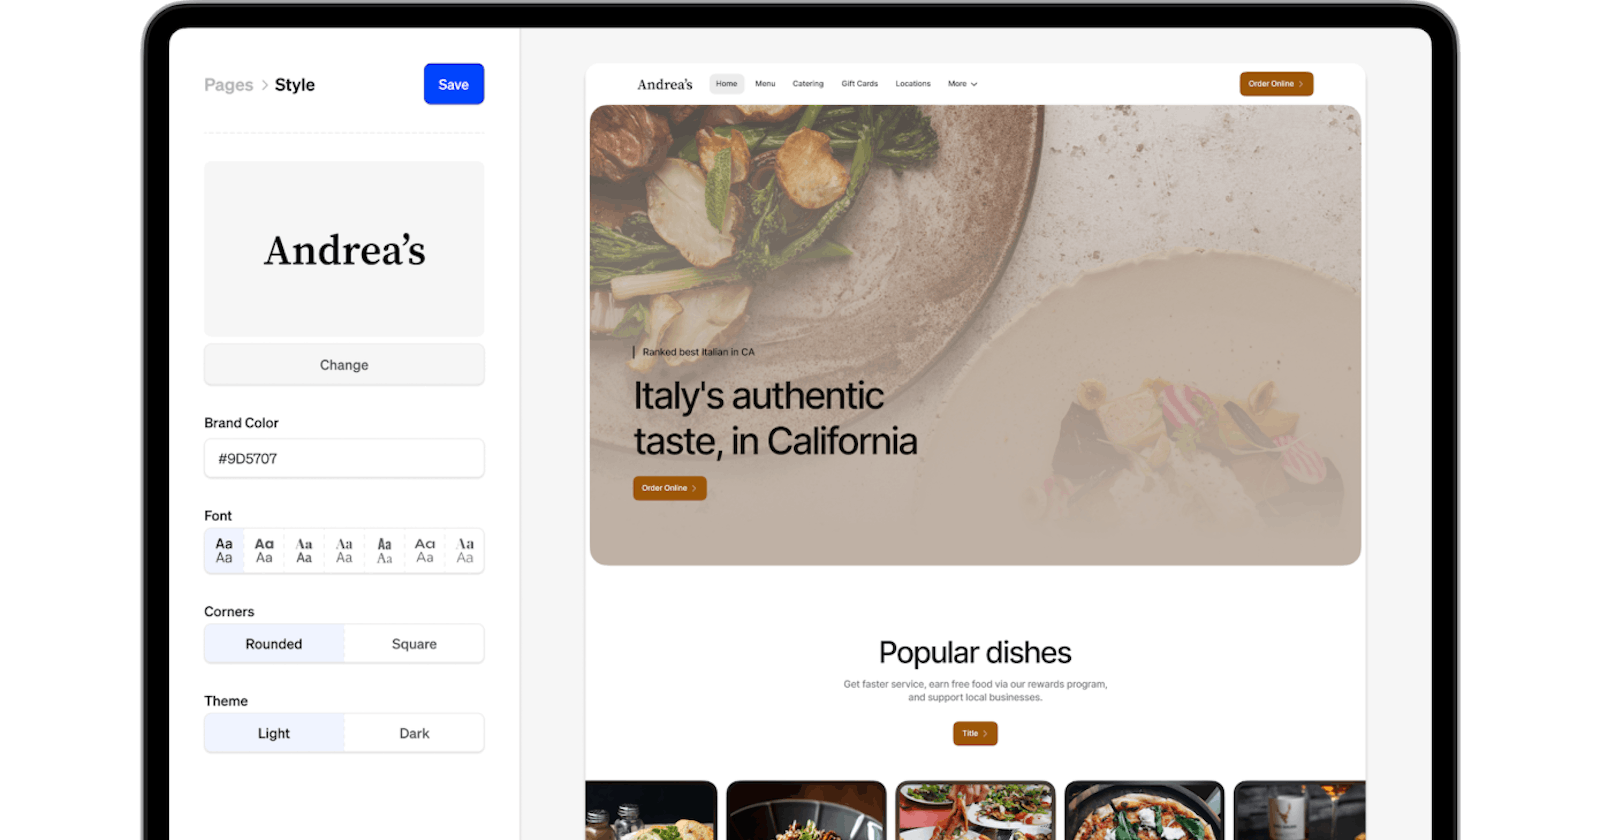 Owner.com raises $33M Series B for its platform that helps independent restaurants with online ordering and website building.